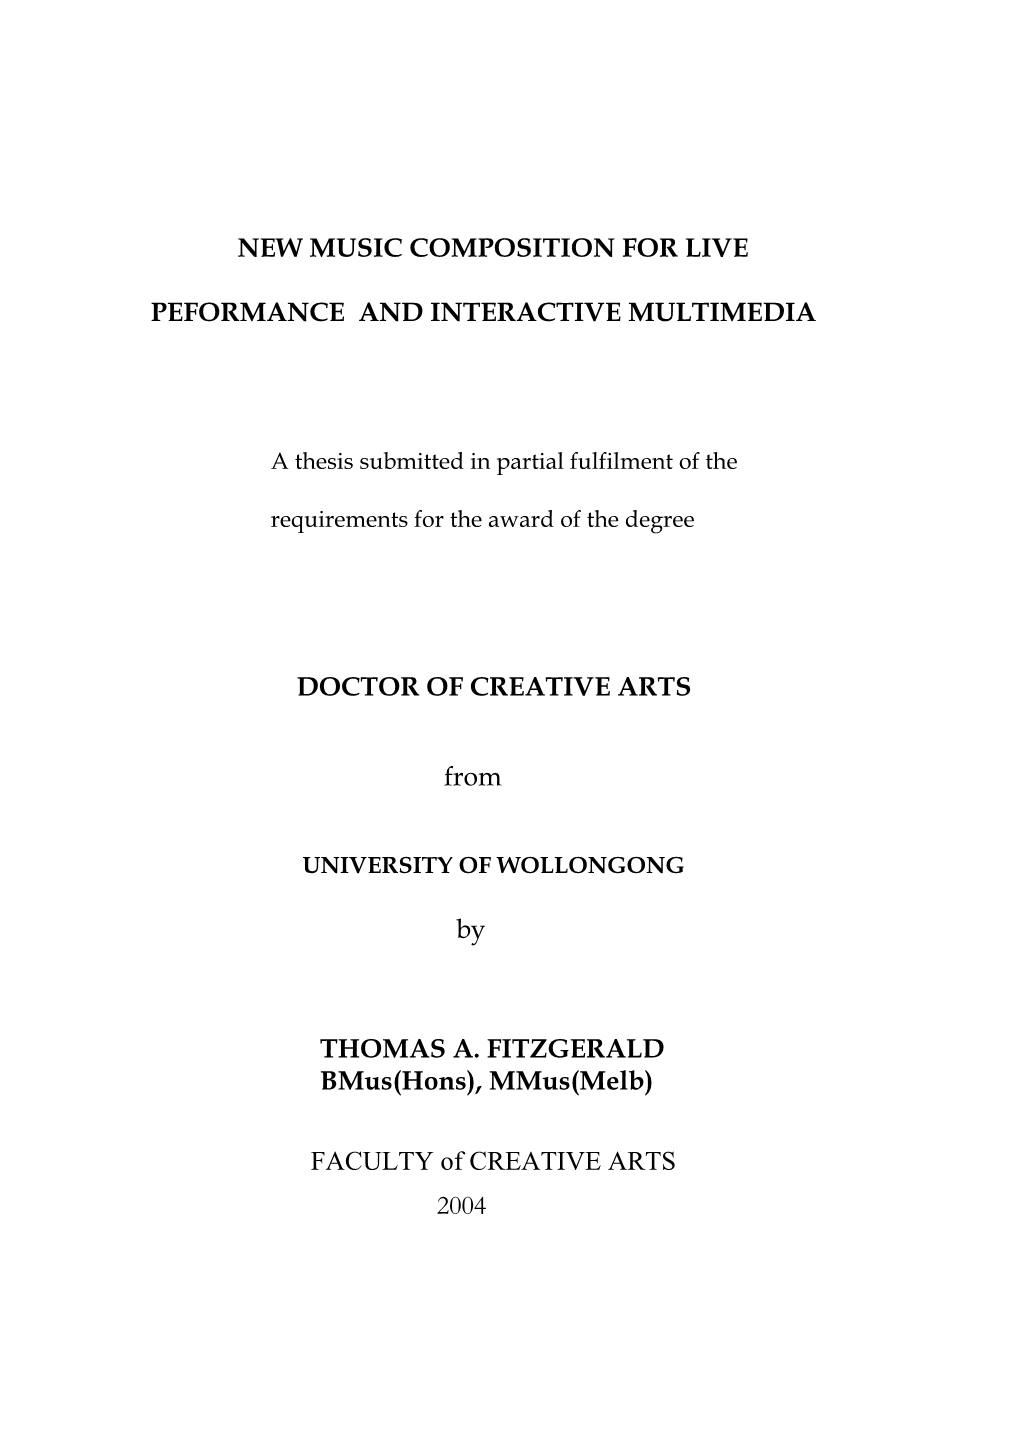 NEW MUSIC COMPOSITION for LIVE PEFORMANCE and INTERACTIVE MULTIMEDIA DOCTOR of CREATIVE ARTS from by THOMAS A. FITZGERALD Bmus